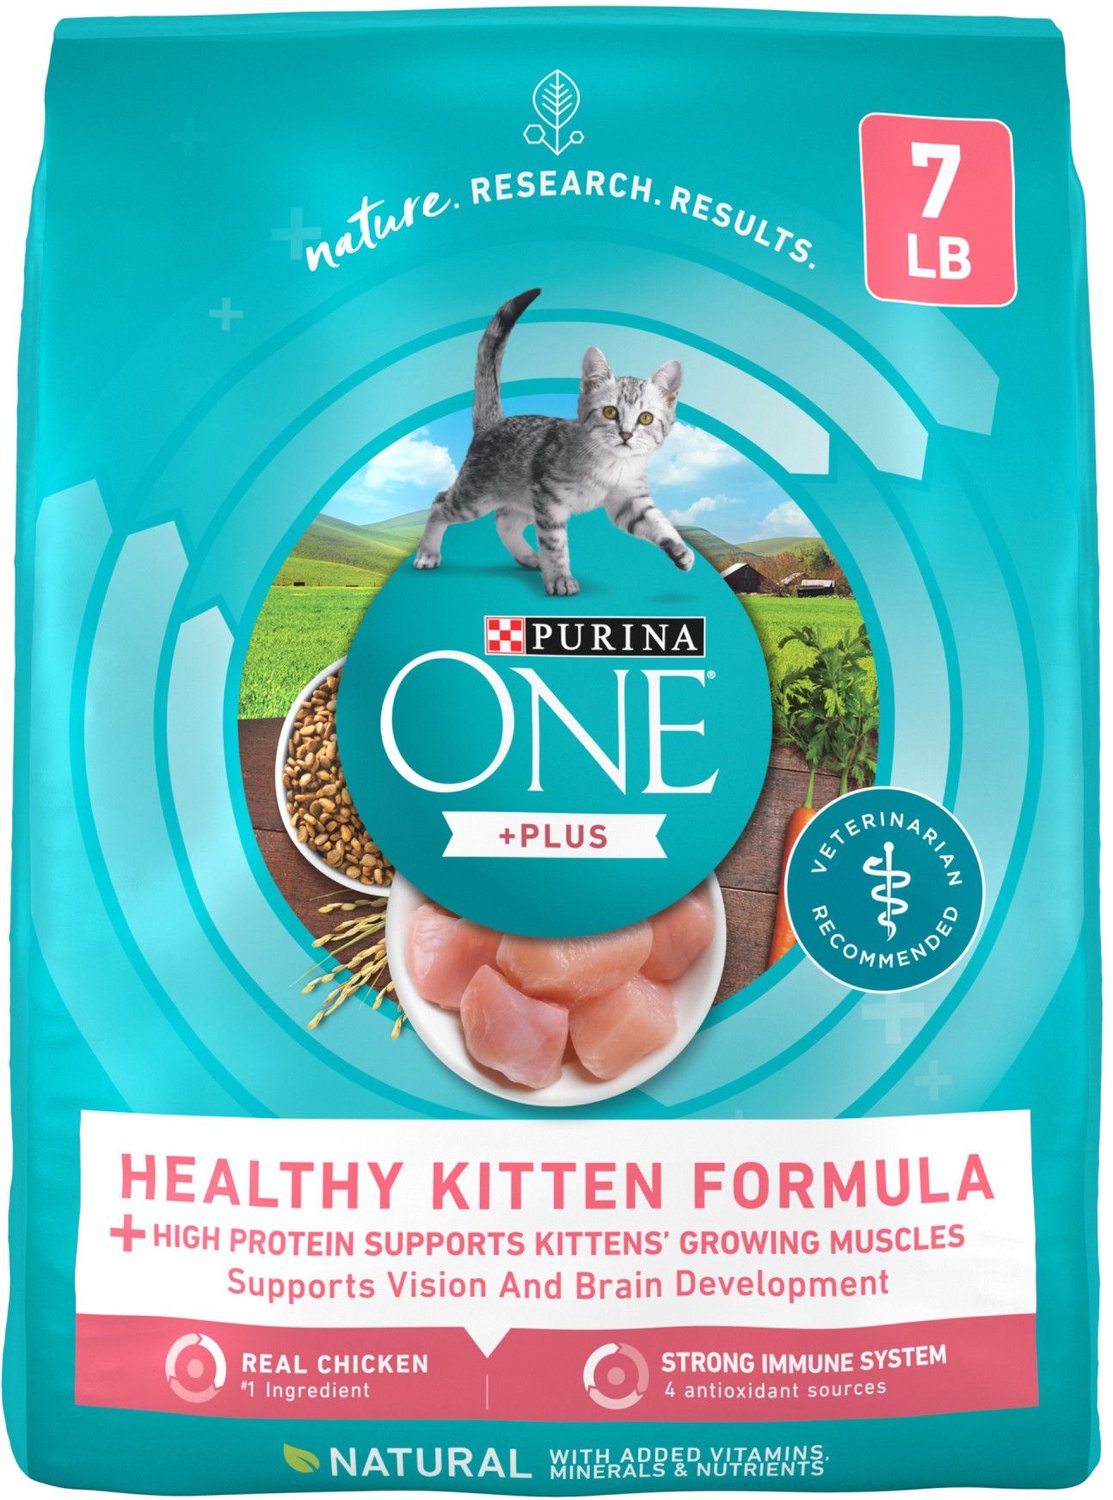 Chewy Purina One Kitten Food